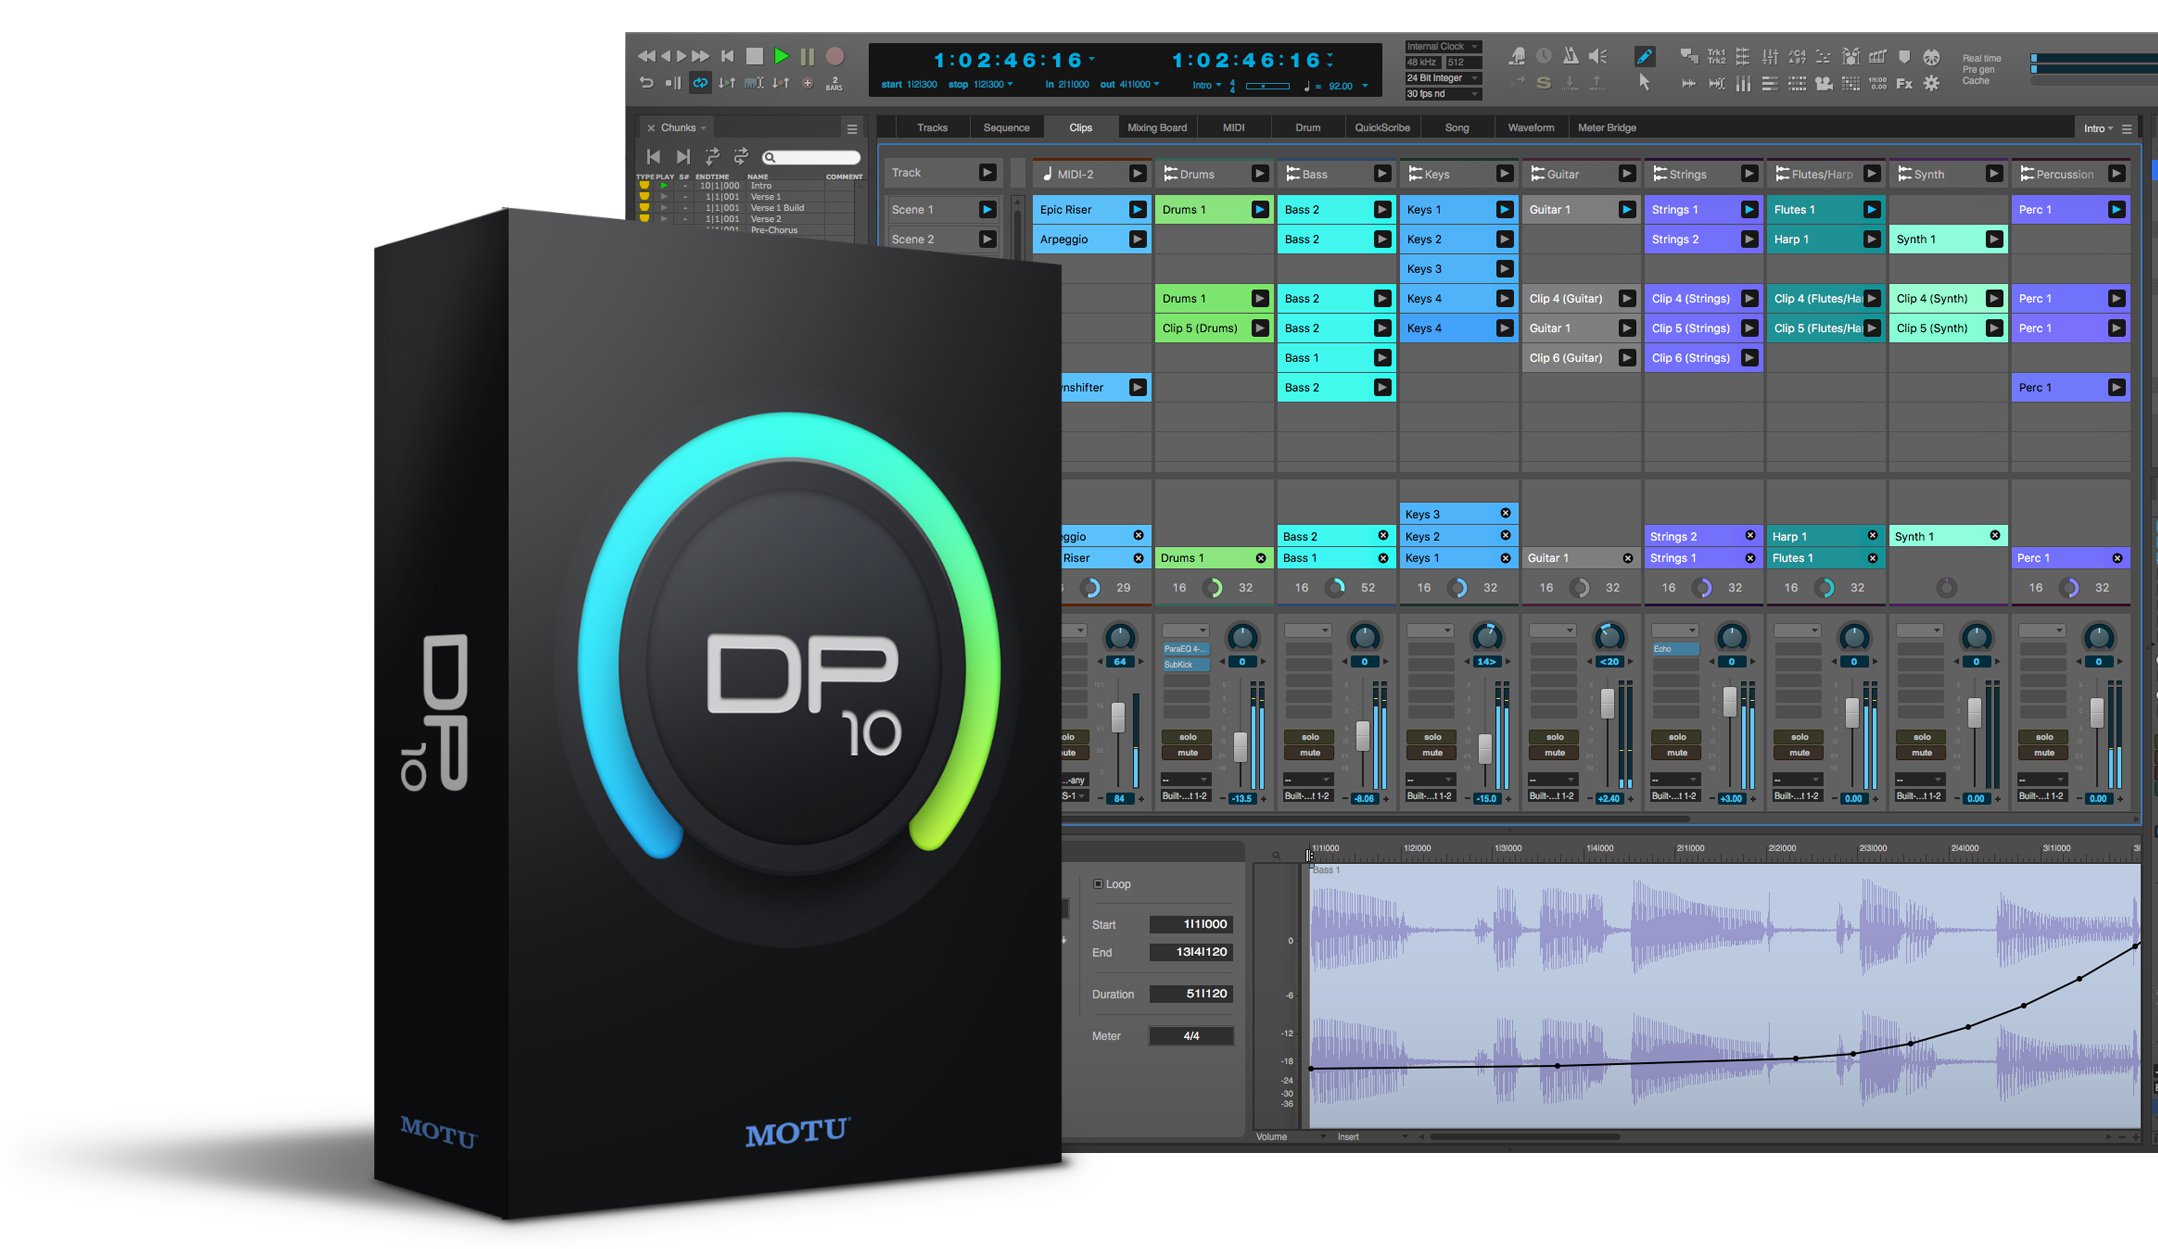 MOTU’s DAW get’s clip launching like Ableton in it’s next version to enhance production flow